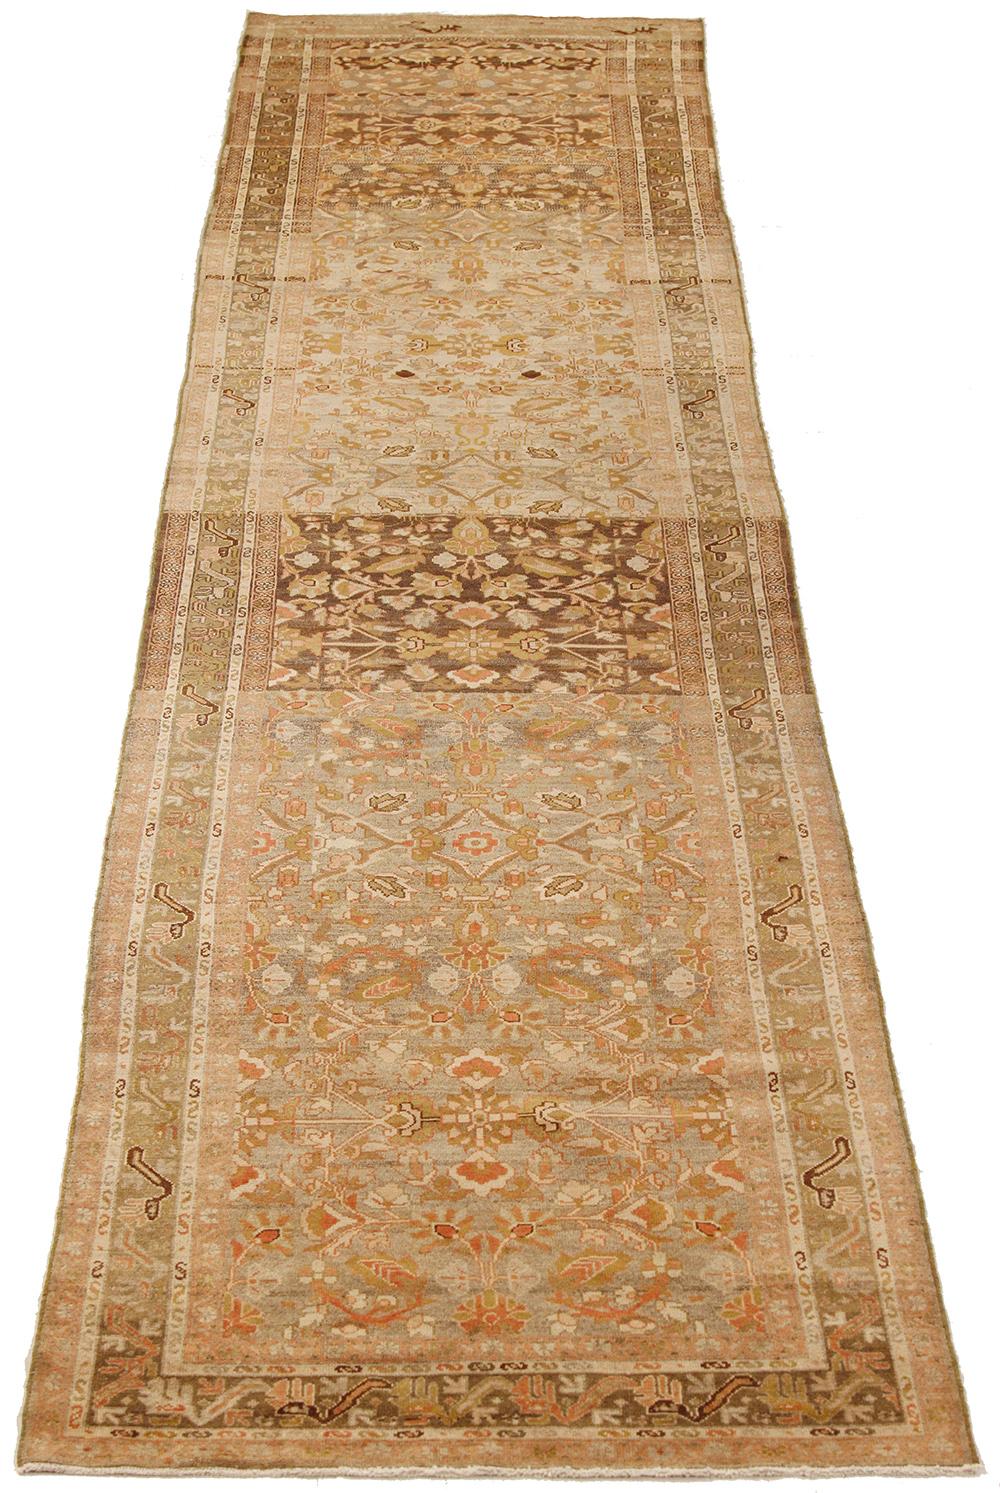 Antique Persian rug handwoven from the finest sheep’s wool and colored with all-natural vegetable dyes that are safe for humans and pets. It’s a traditional Mafrash design highlighted by brown and red botanical details over a mixed brown and beige